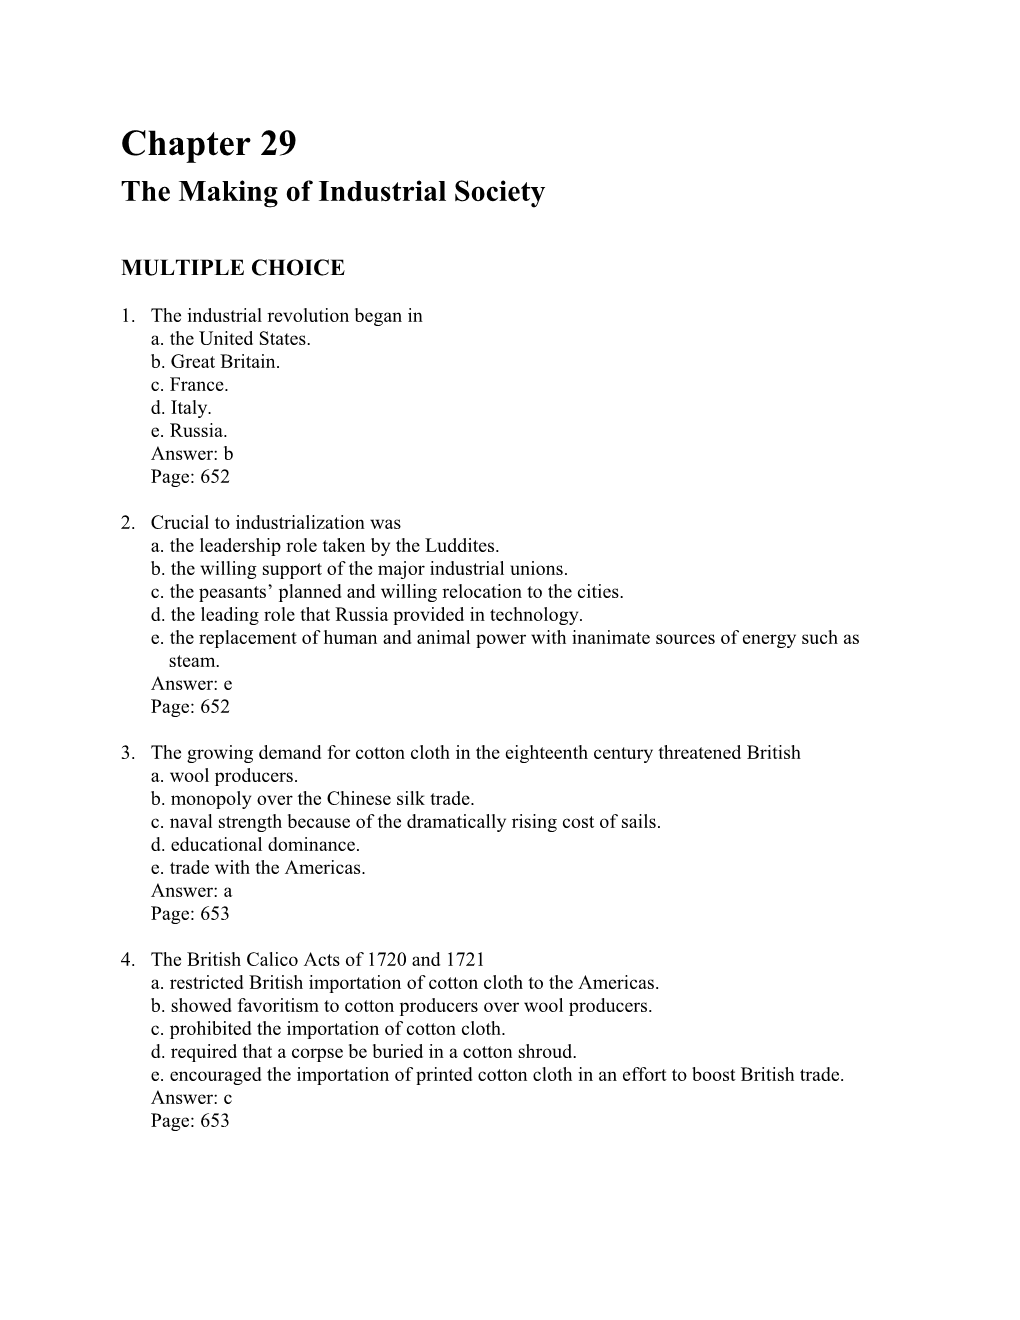 The Making of Industrial Society